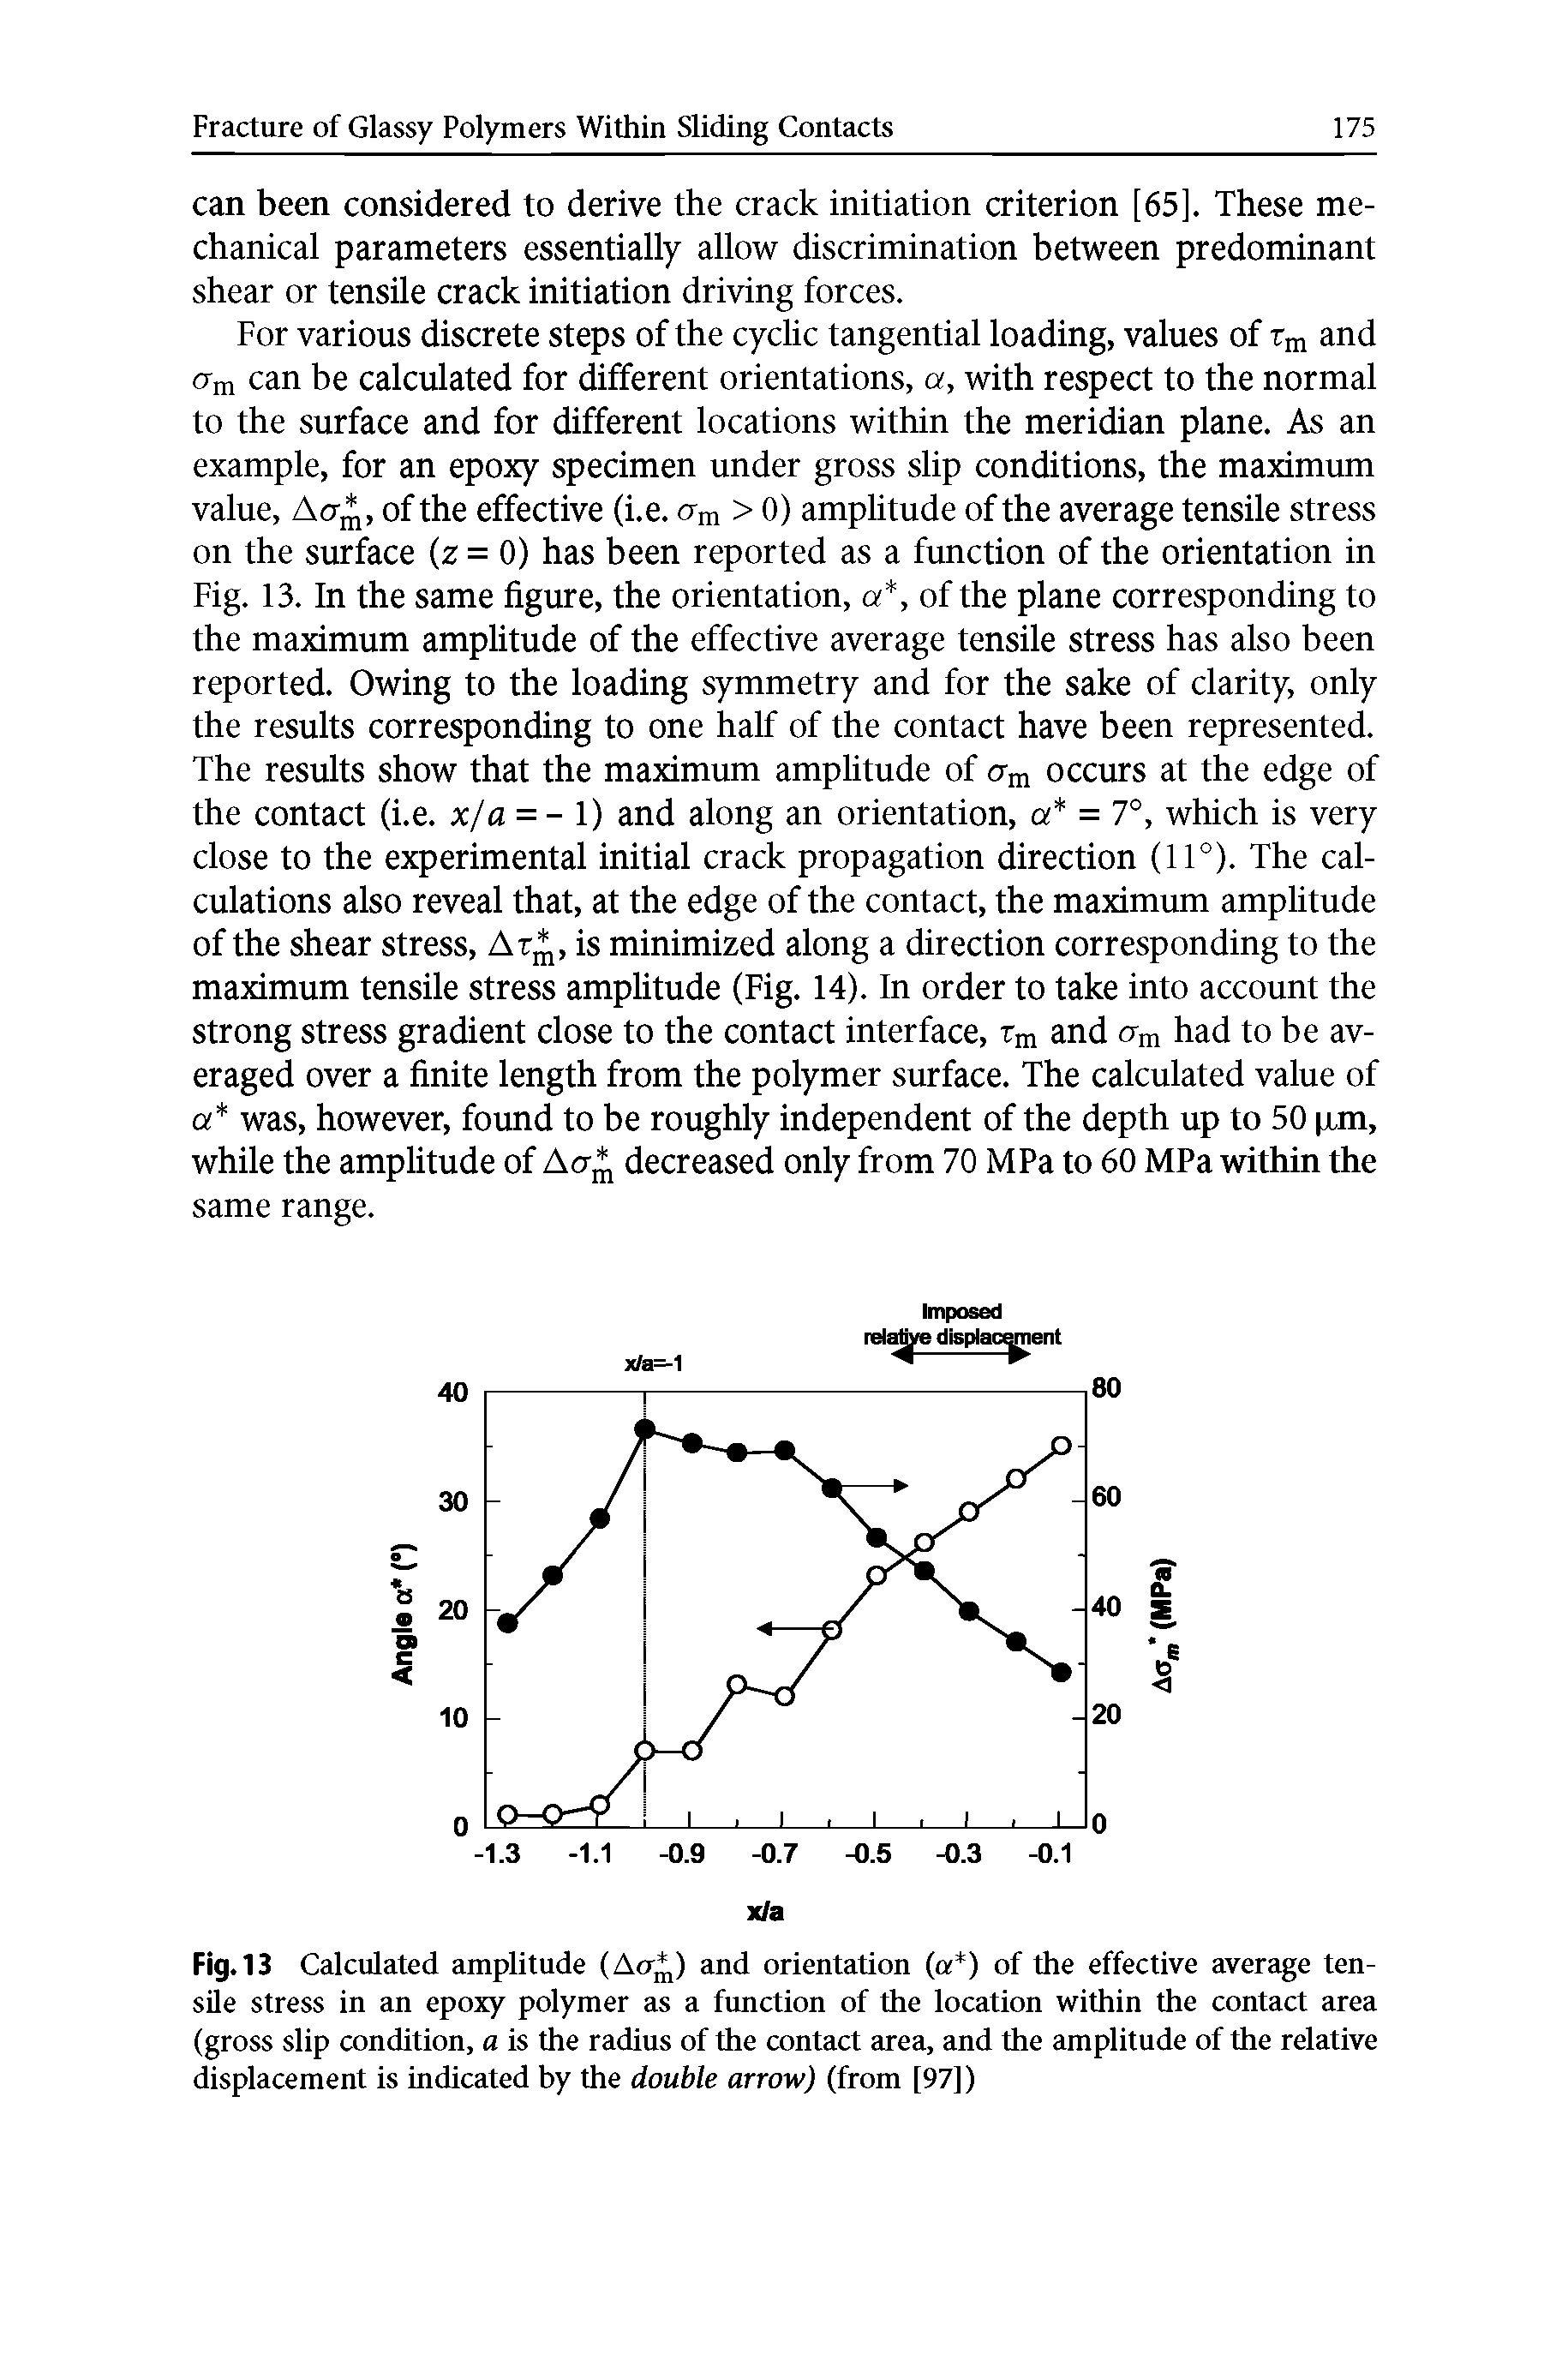 Fig. 13 Calculated amplitude (Act ) and orientation (a ) of the effective average tensile stress in an epoxy polymer as a function of the location within the contact area (gross slip condition, a is the radius of the contact area, and the amplitude of the relative displacement is indicated by the double arrow) (from [97])...